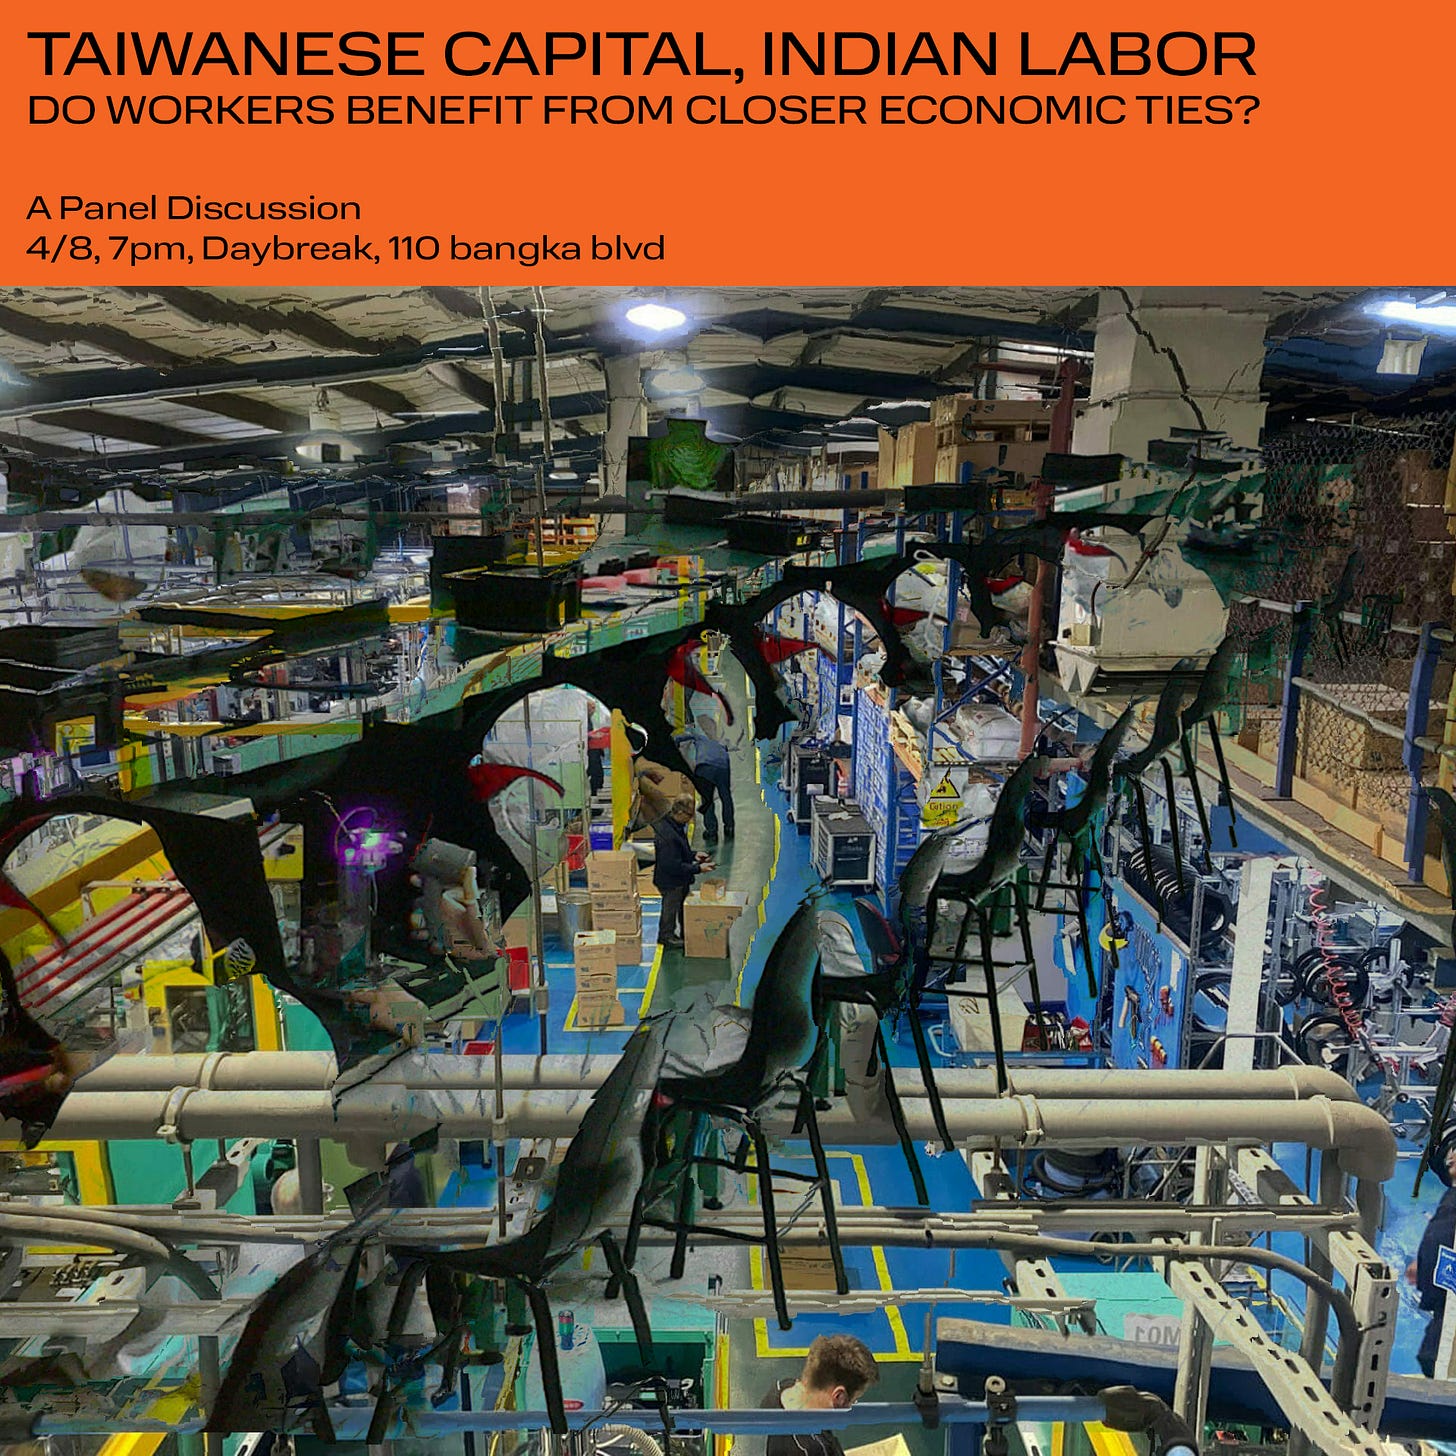 May be an image of 2 people and text that says 'TAIWANESE CAPITAL, INDIAN LABOR DO WORKERS BENEFIT FROM CLOSER ECONOMIC TIES? APanel Discussion 4/8, 7pm, Daybreak, 110 bangka blvd LOM'